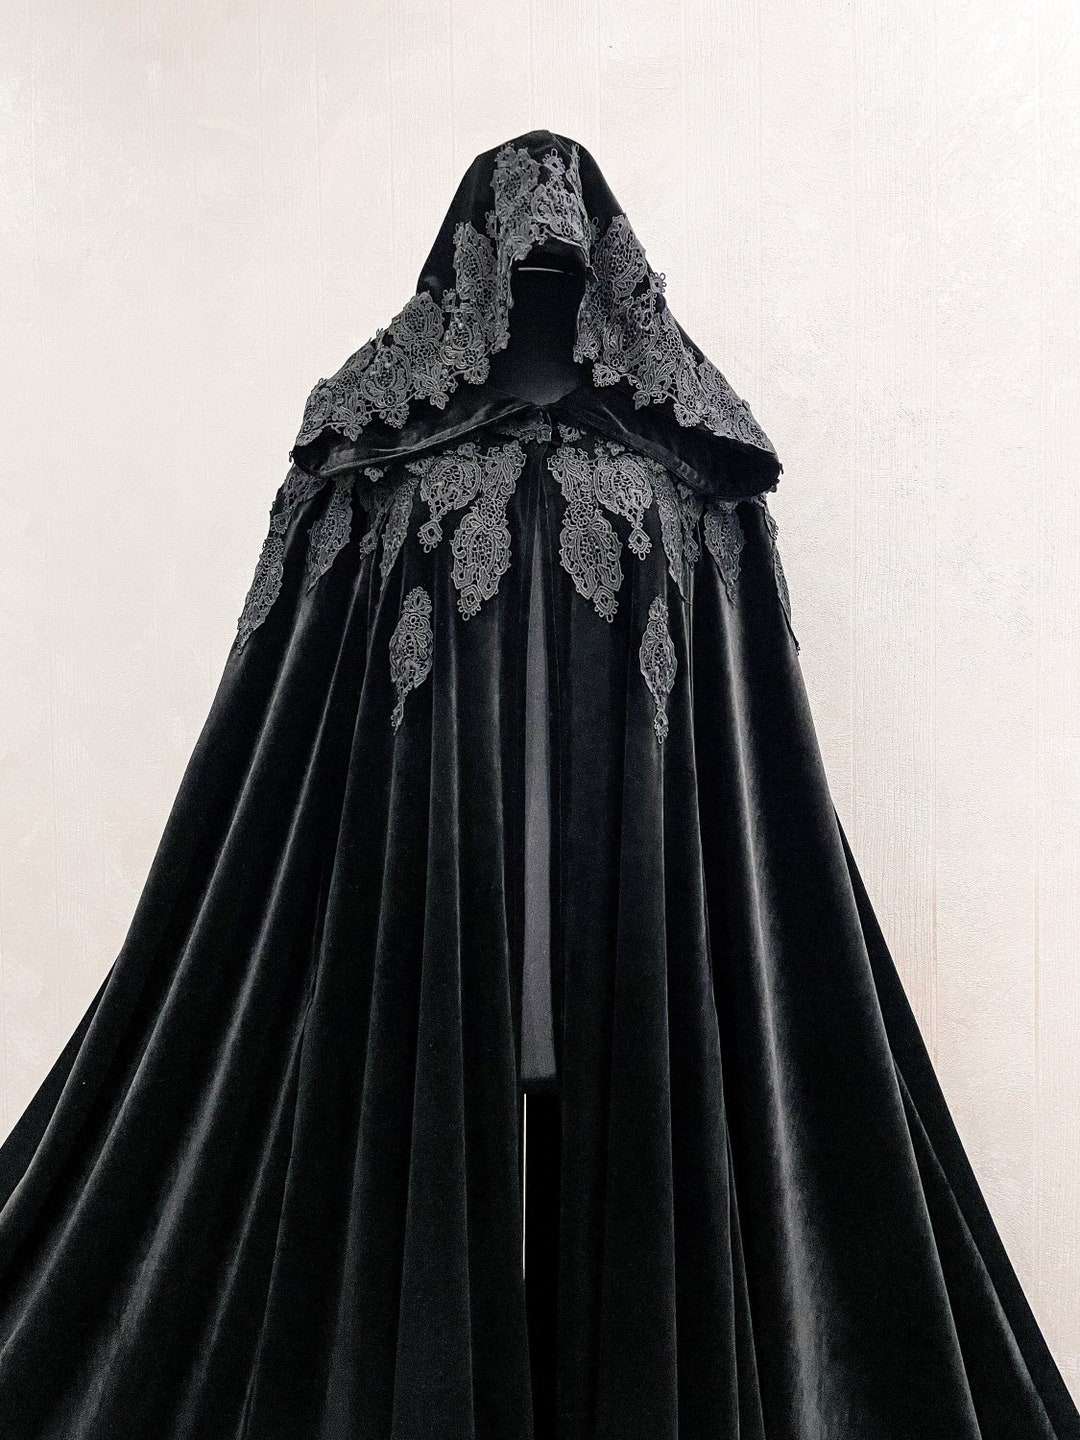 Hooded Lace Cloak Blush Veil Lace Black Cape With Hood Halloween Cape  Halloween Outfit Gothic Wedding White Lace Veil 